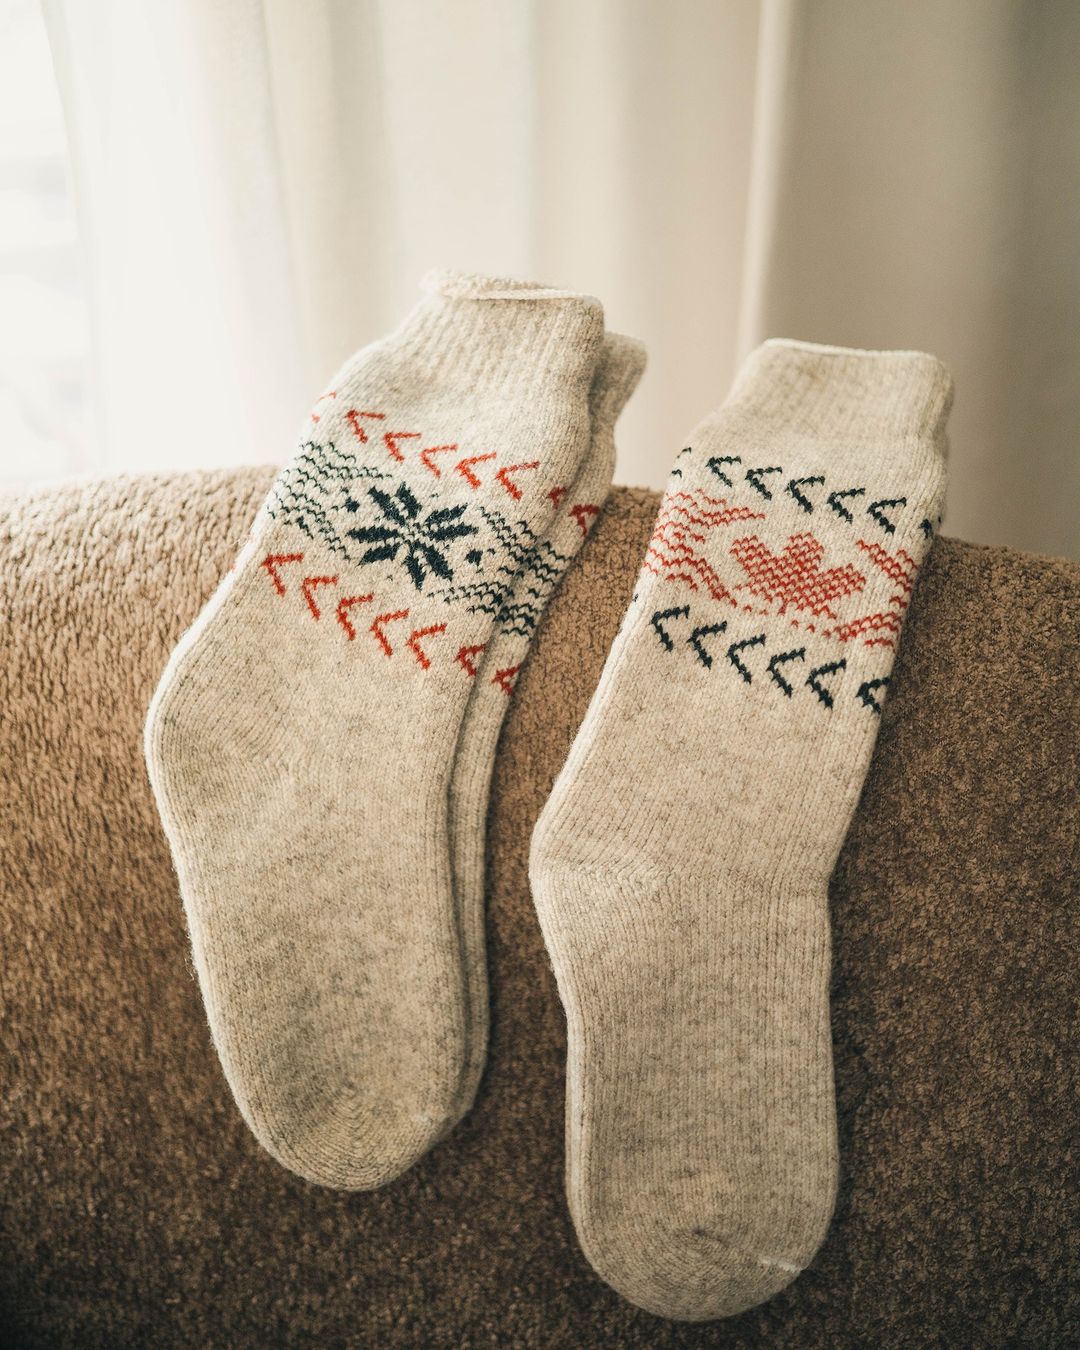 Thermal wool socks with a pattern